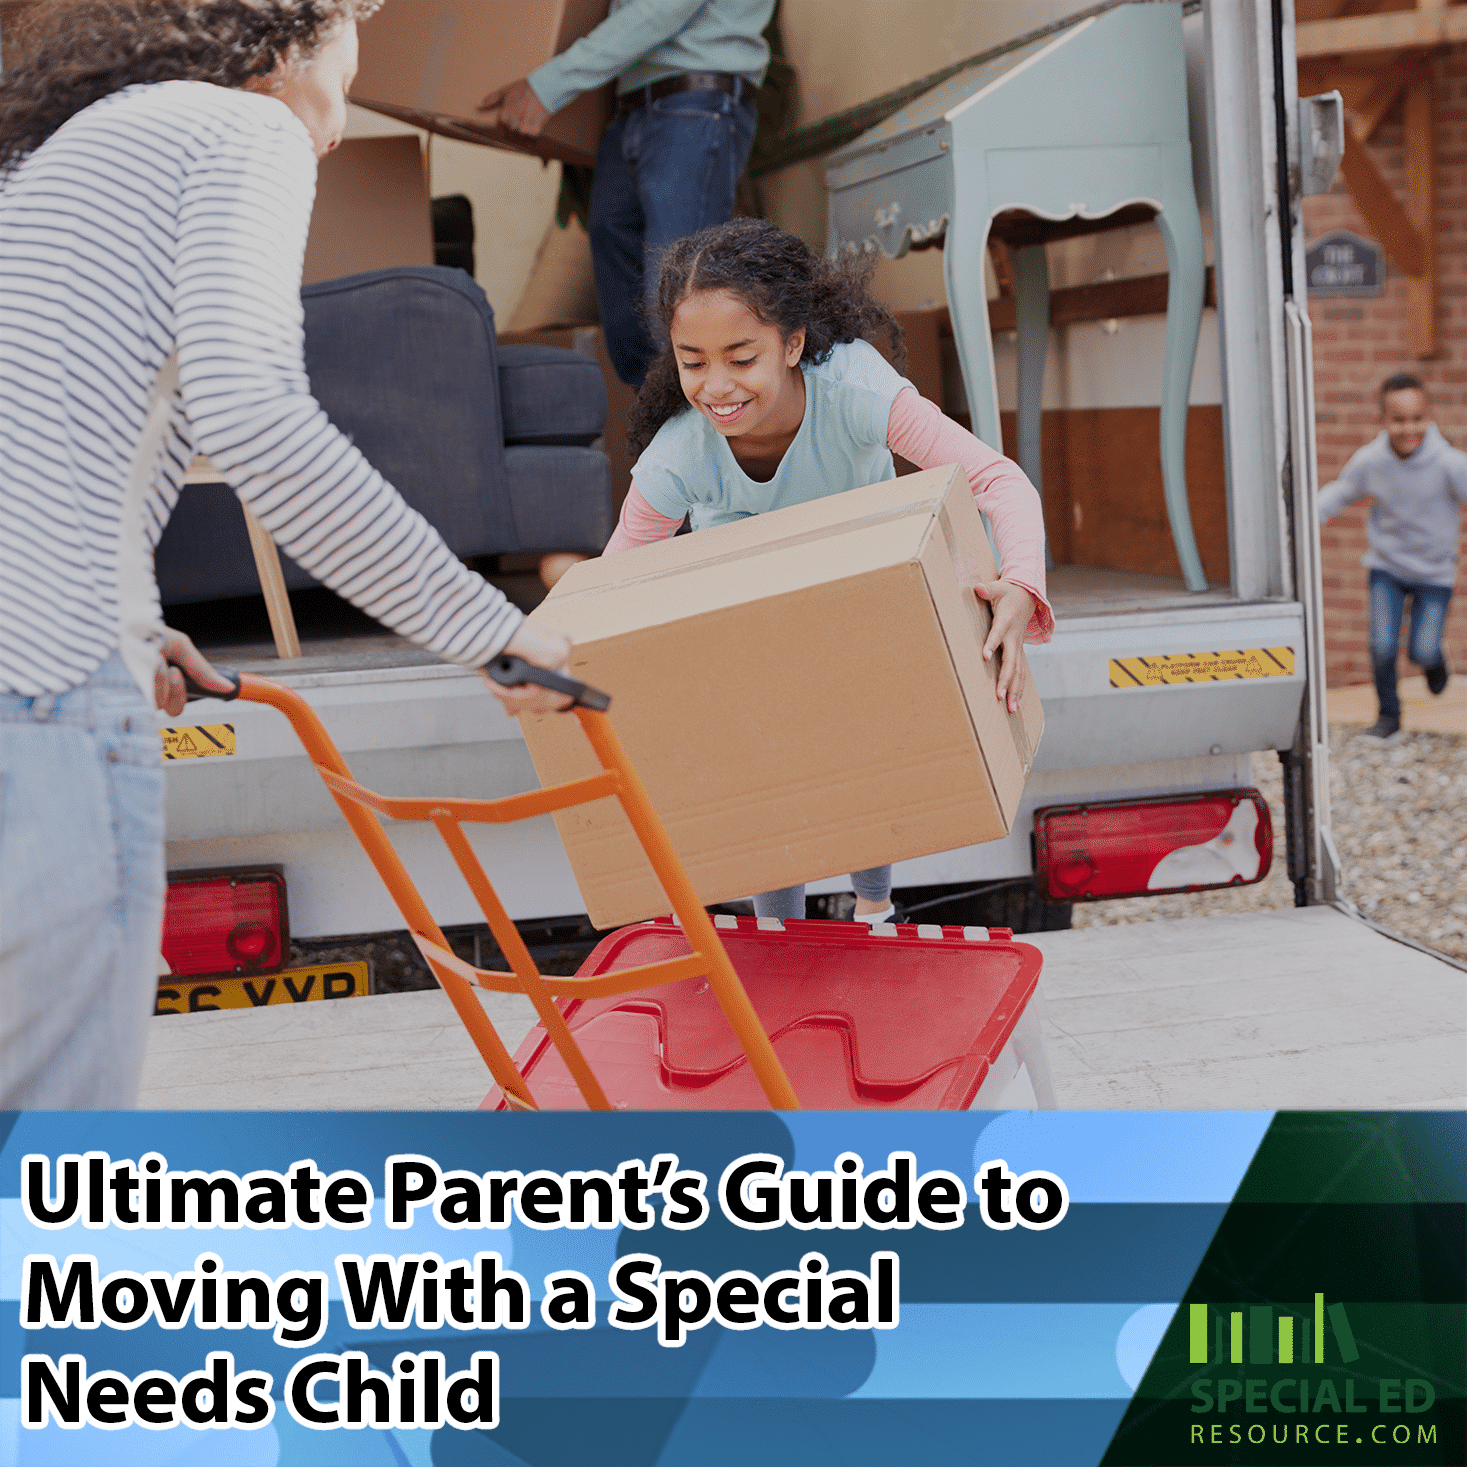 Family moving with a special needs child.